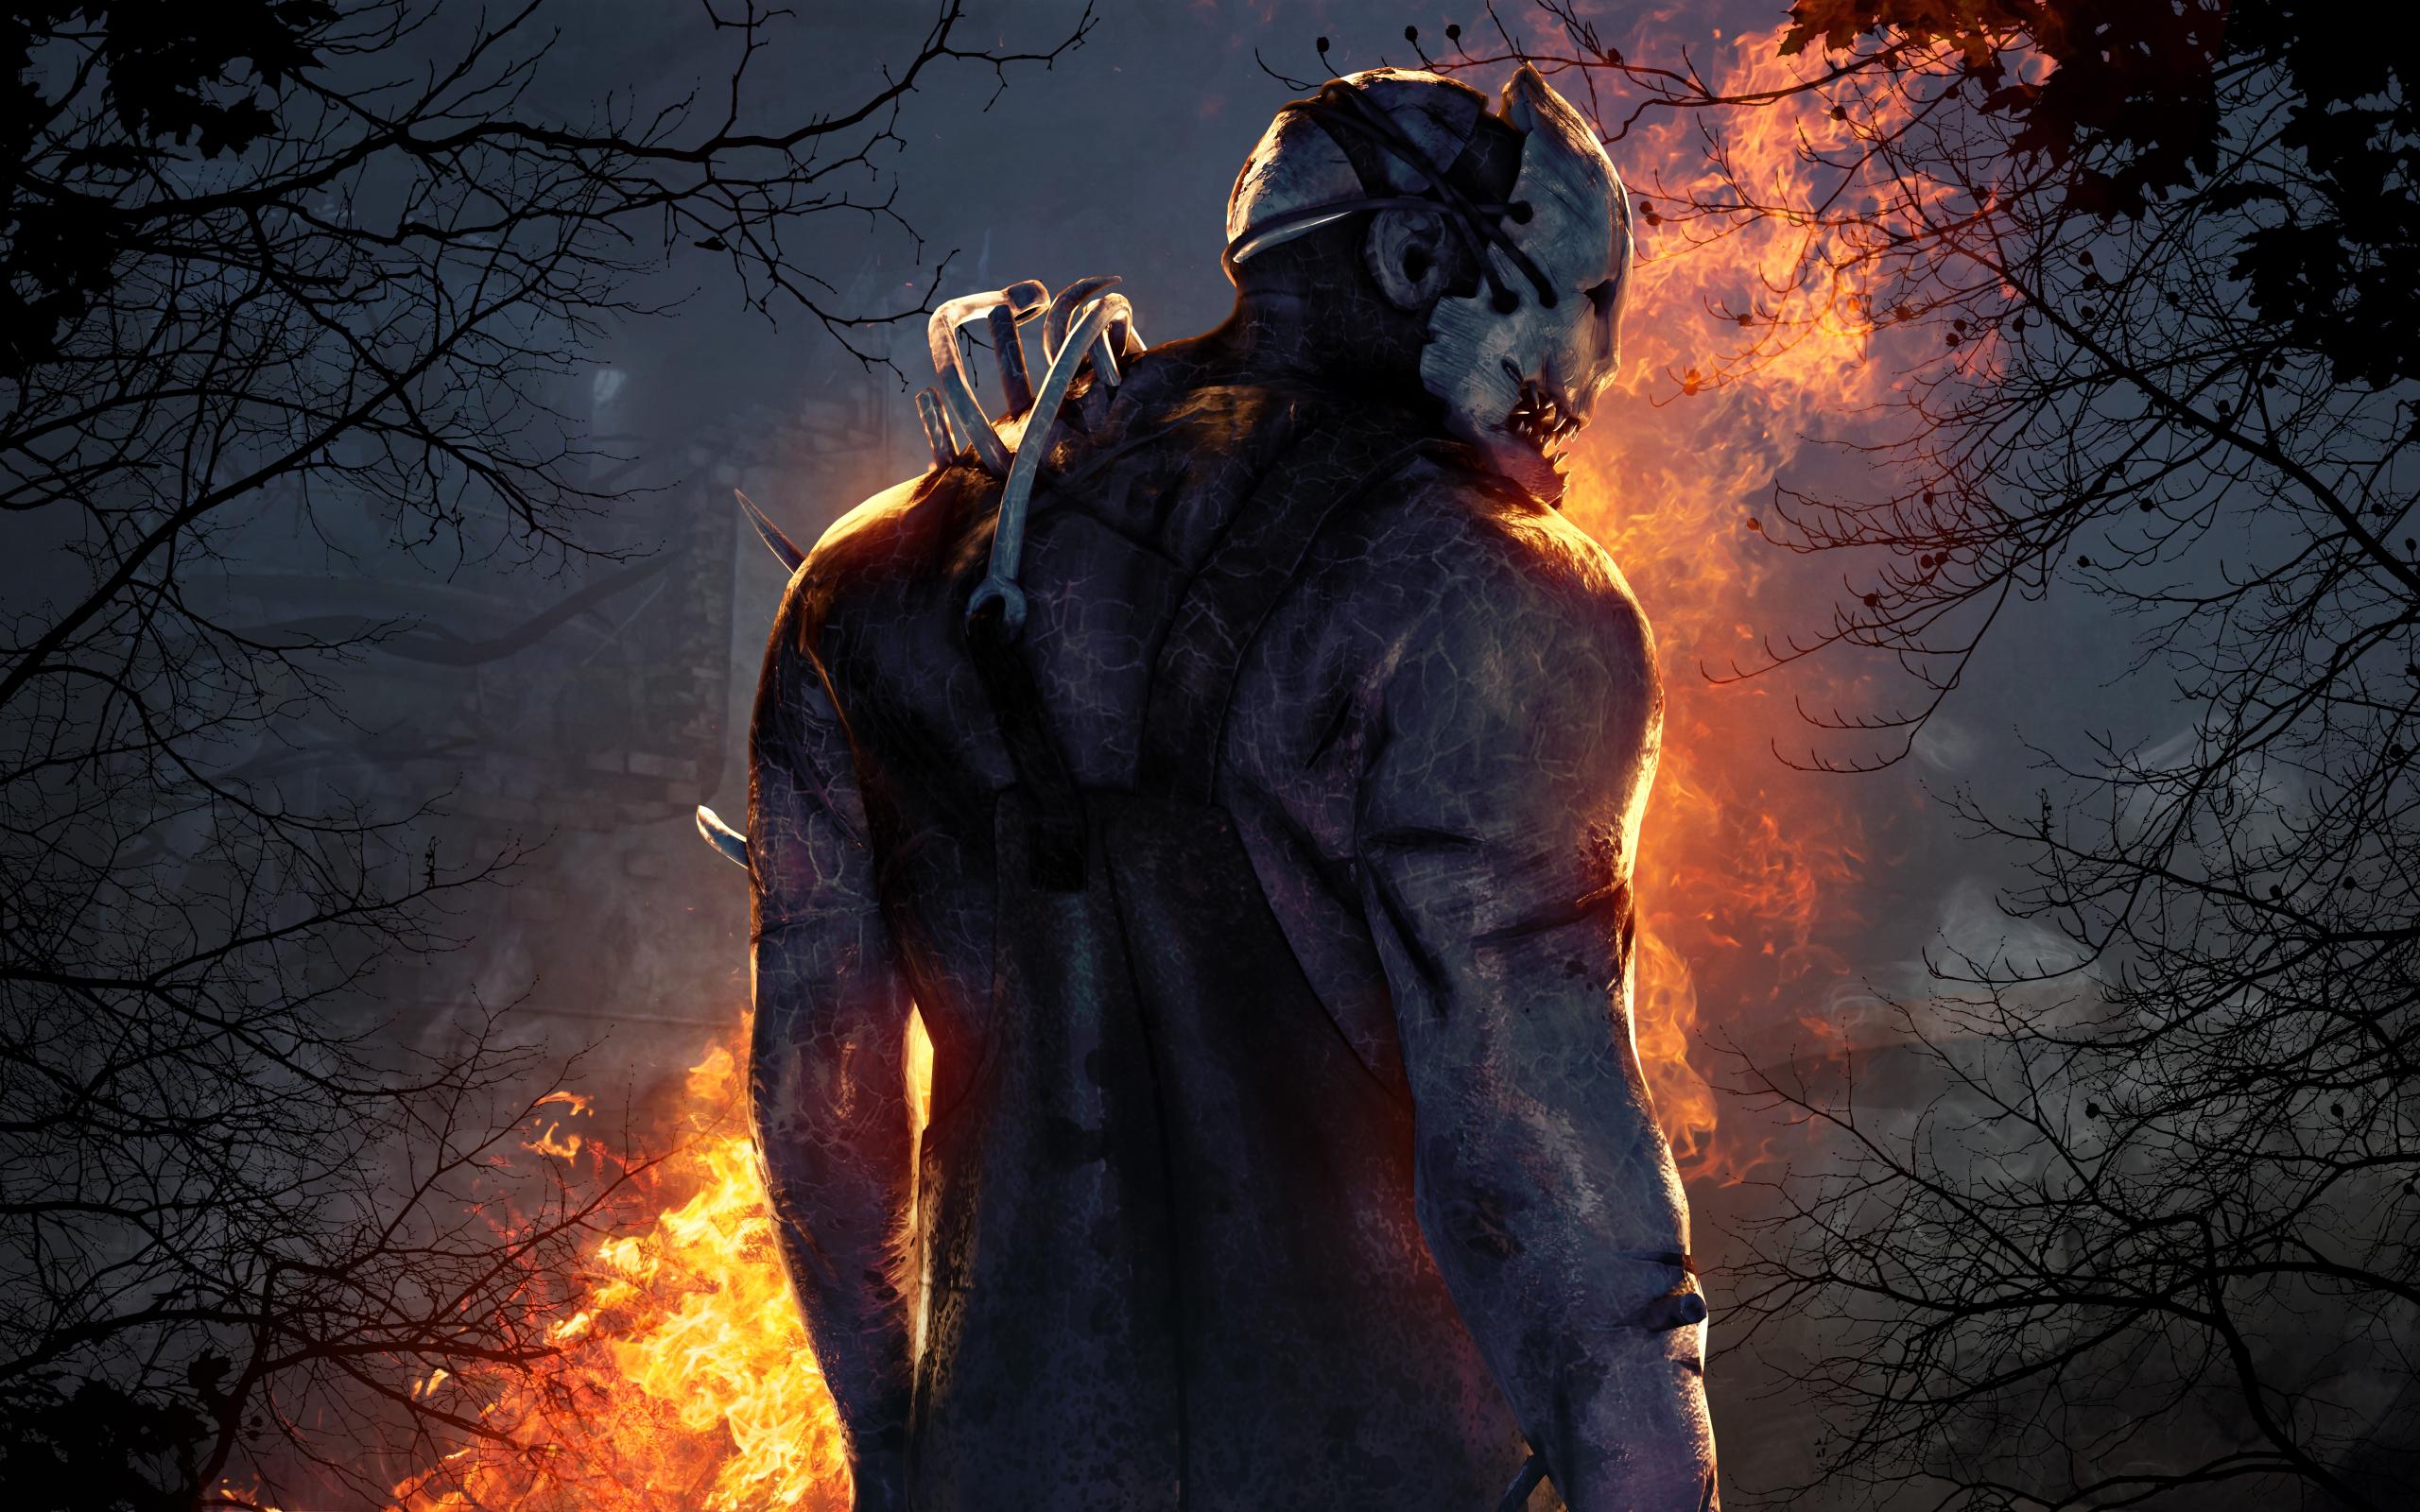 Image for Upcoming Dead By Daylight update will add more graphics updates, HUD refresh and more